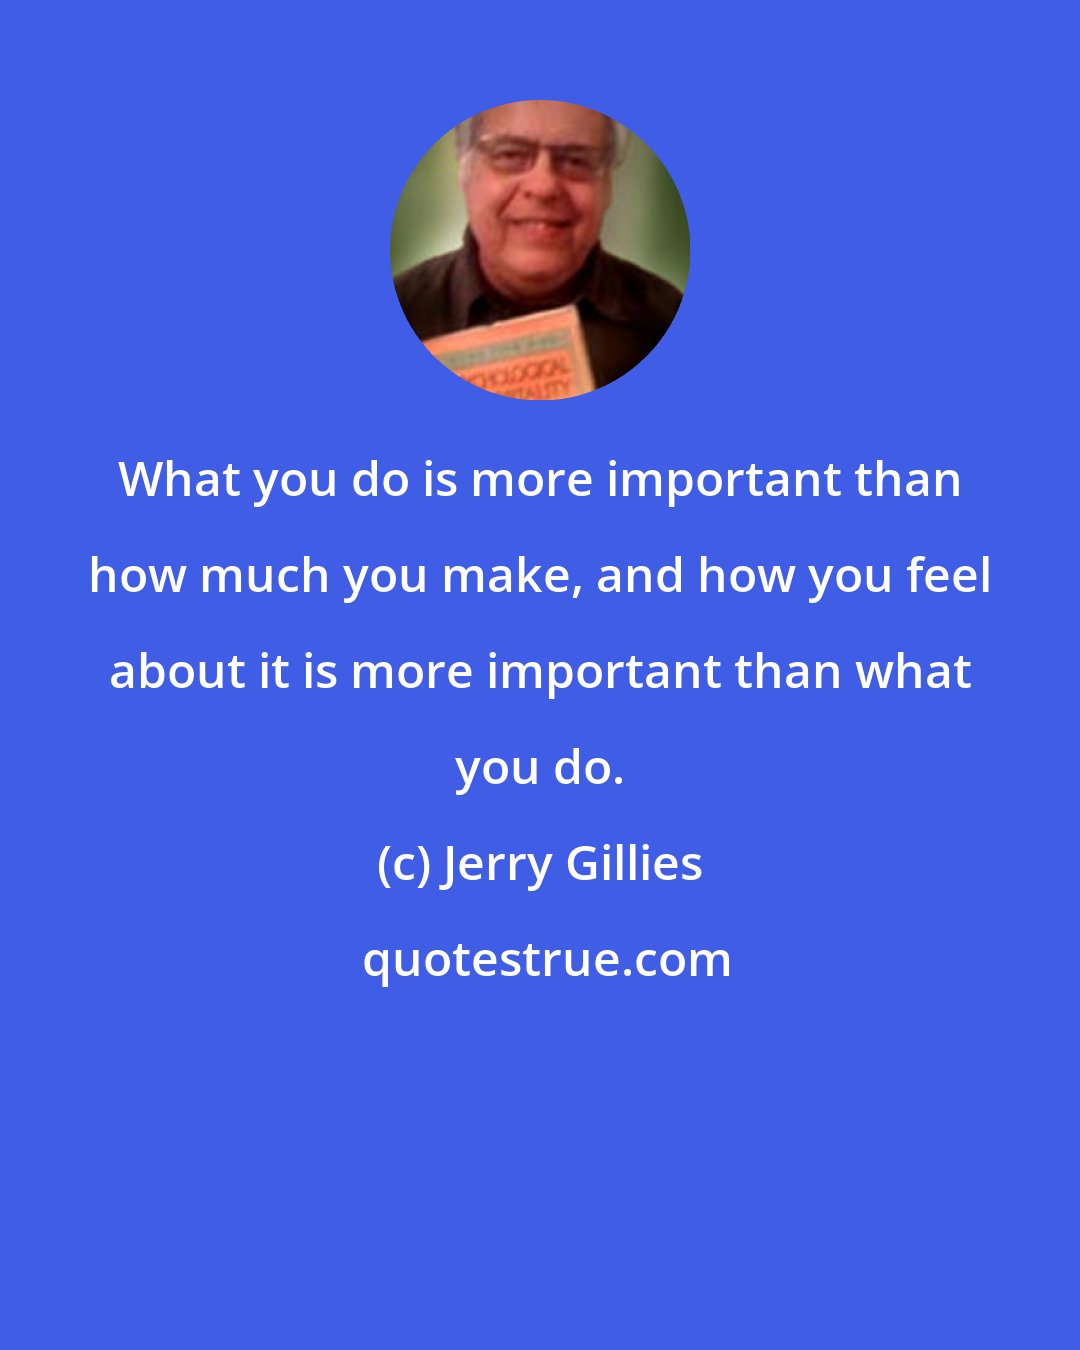 Jerry Gillies: What you do is more important than how much you make, and how you feel about it is more important than what you do.